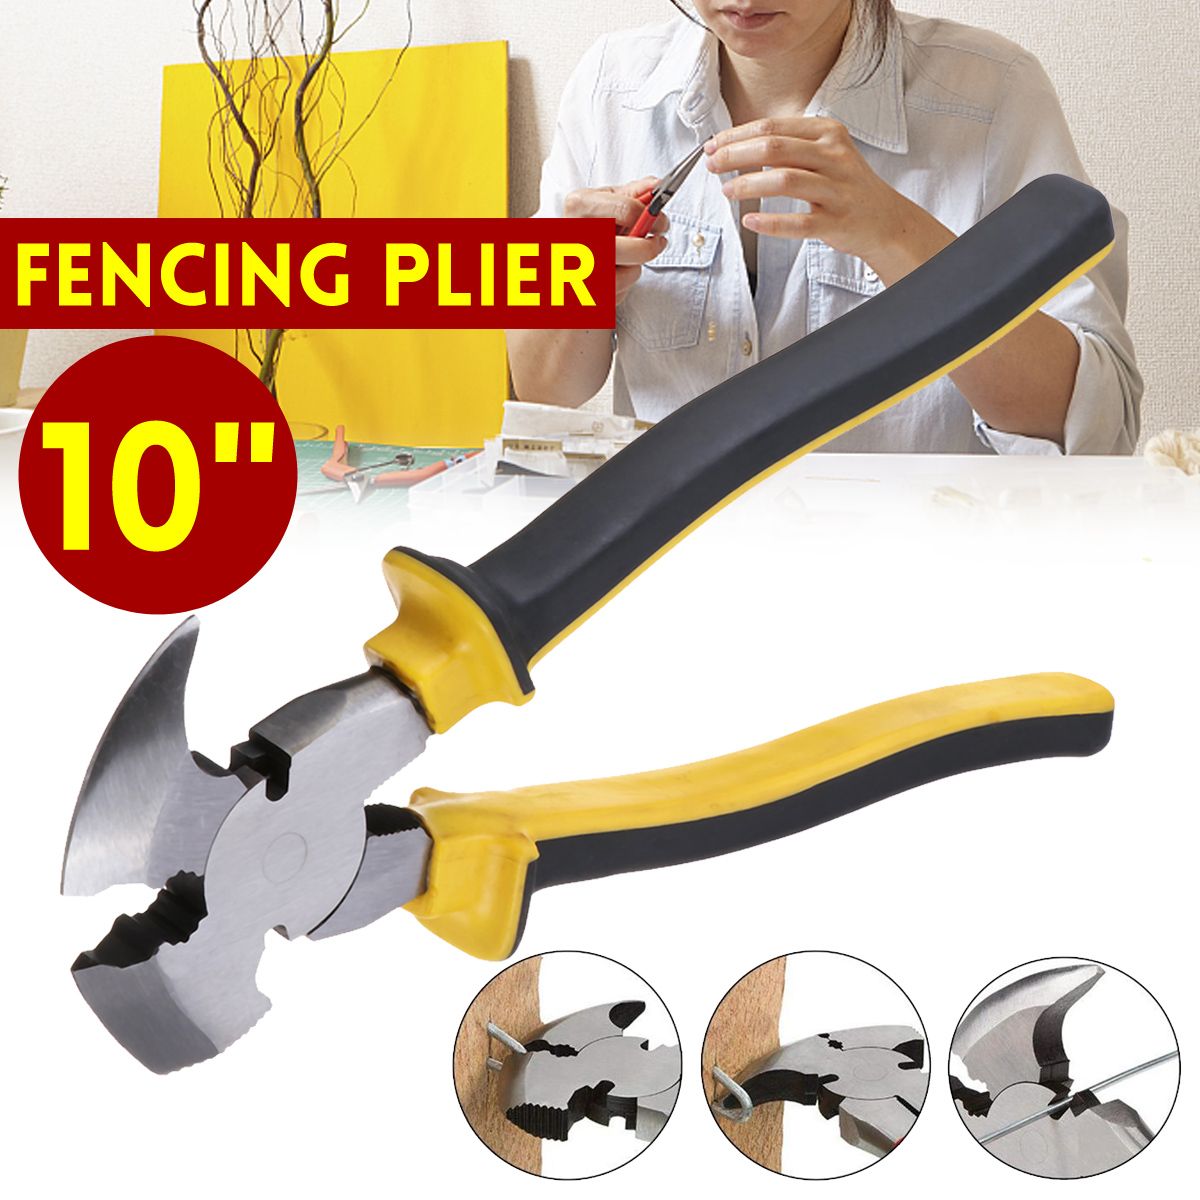 260mm--10-Fencing-Plier-Staple-Remover-Removal-Tool-Clamp-Pincer-Removal-Tool-1718360